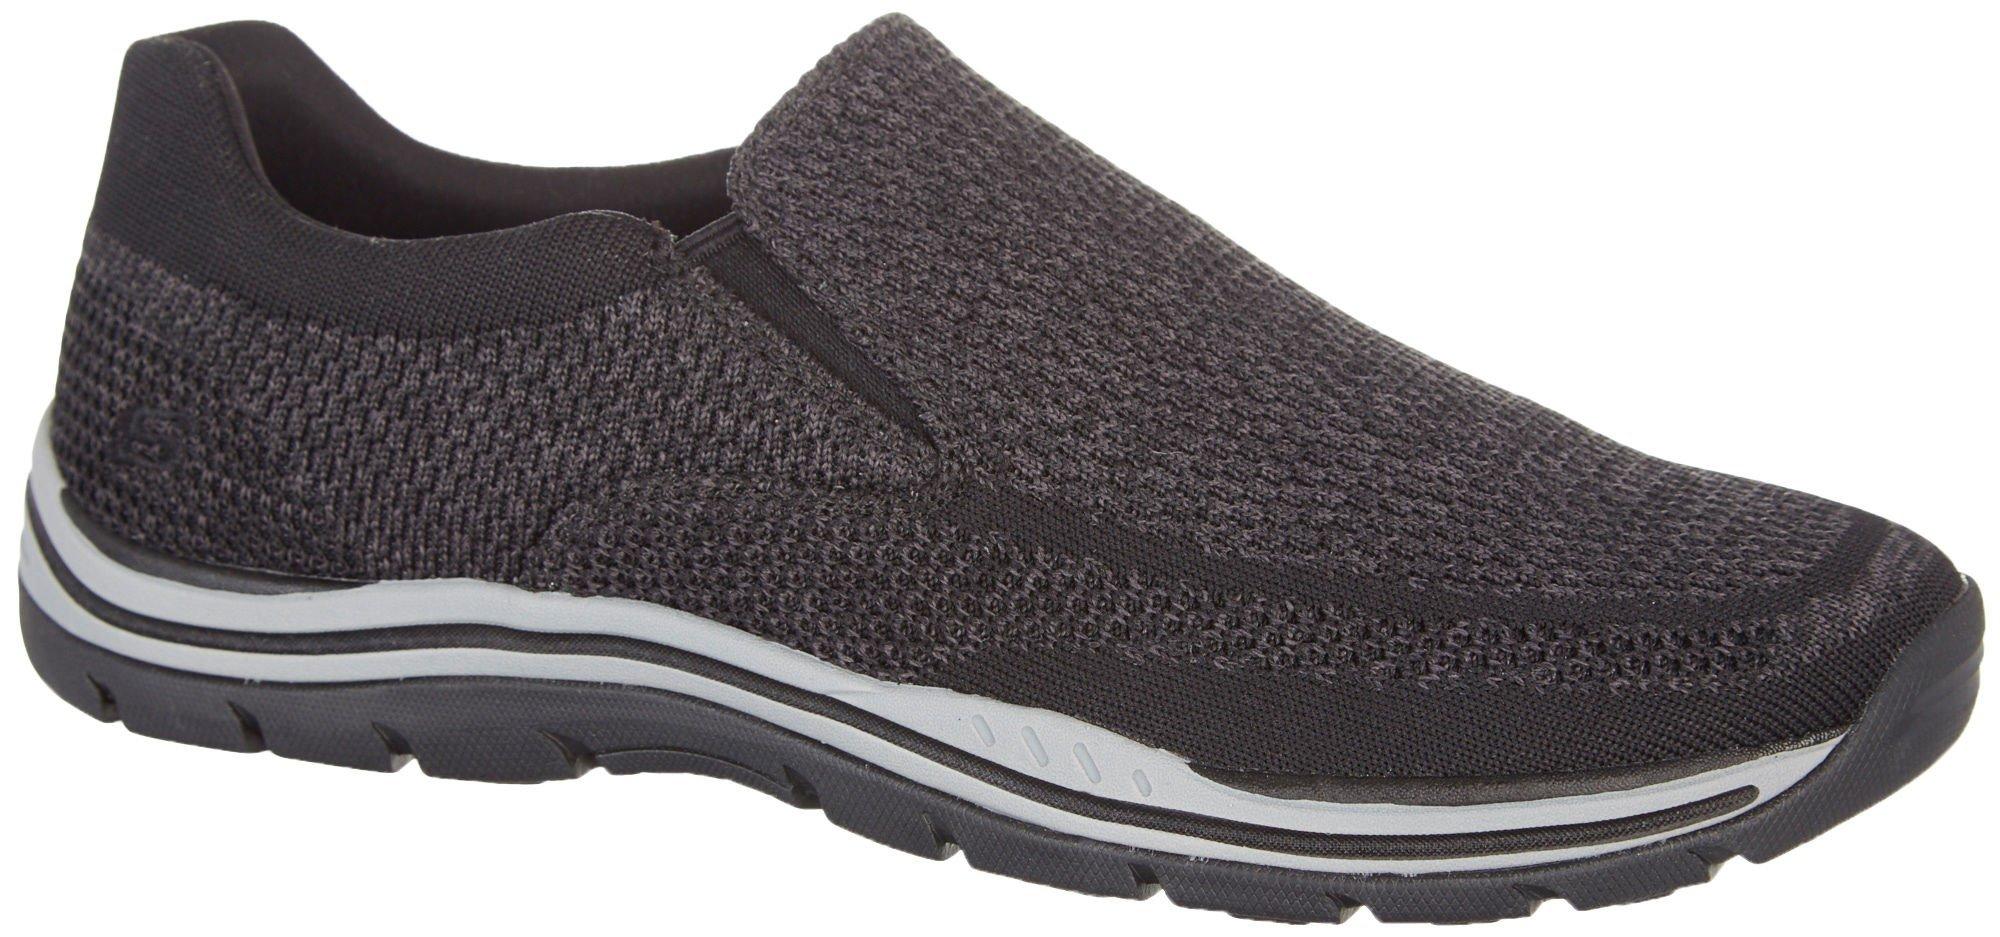 Skechers Mens Relaxed Fit Gomel Shoes 